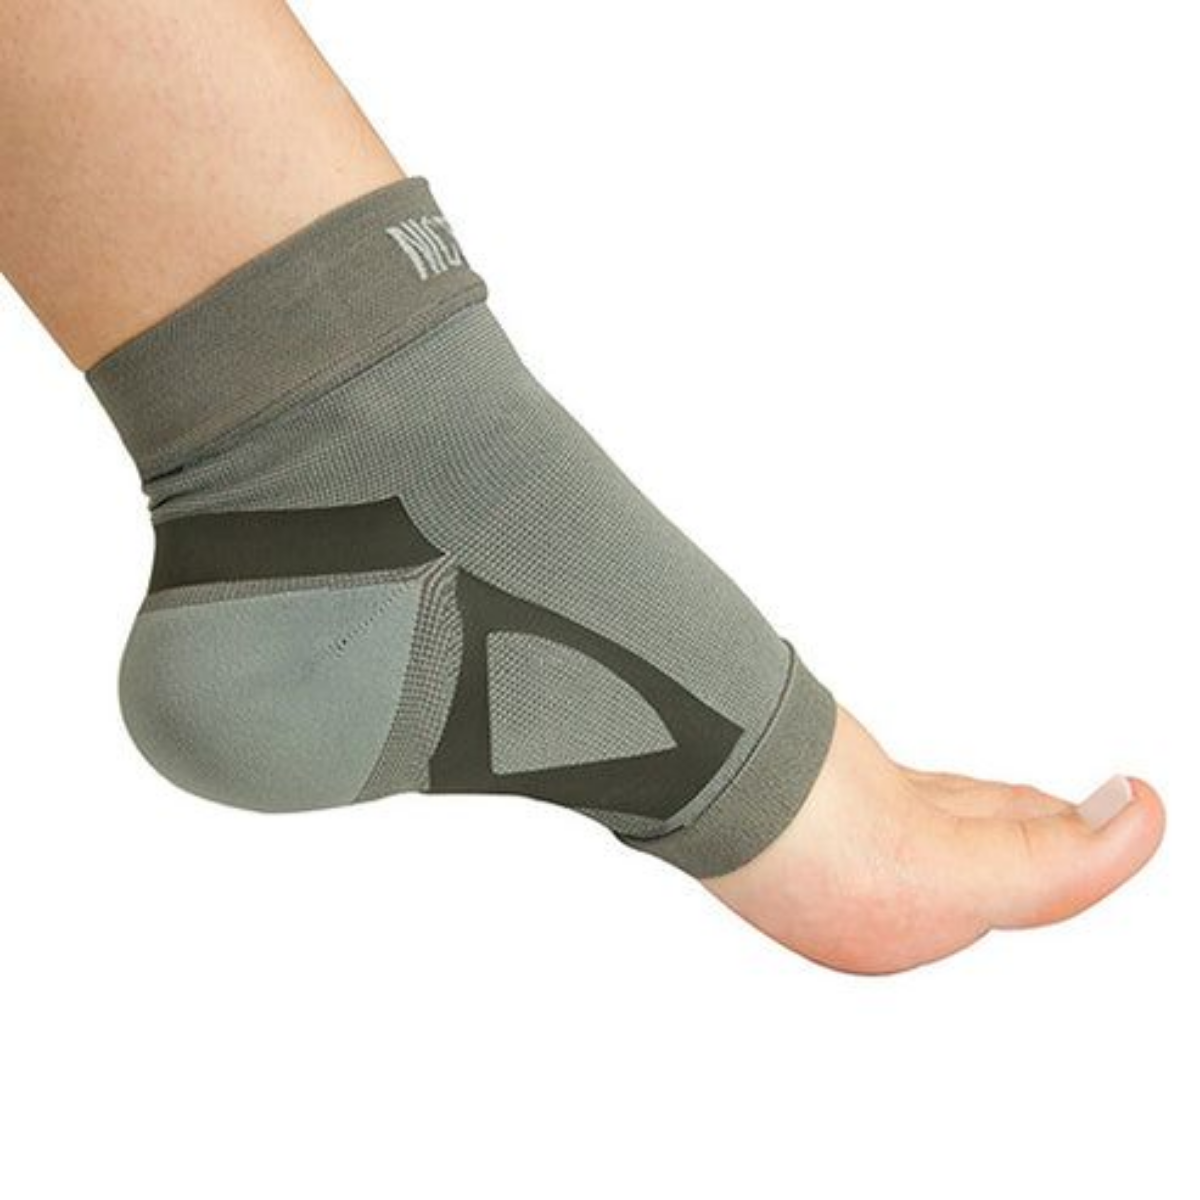 Nice stretch total solution plantar fasciitis relief kit